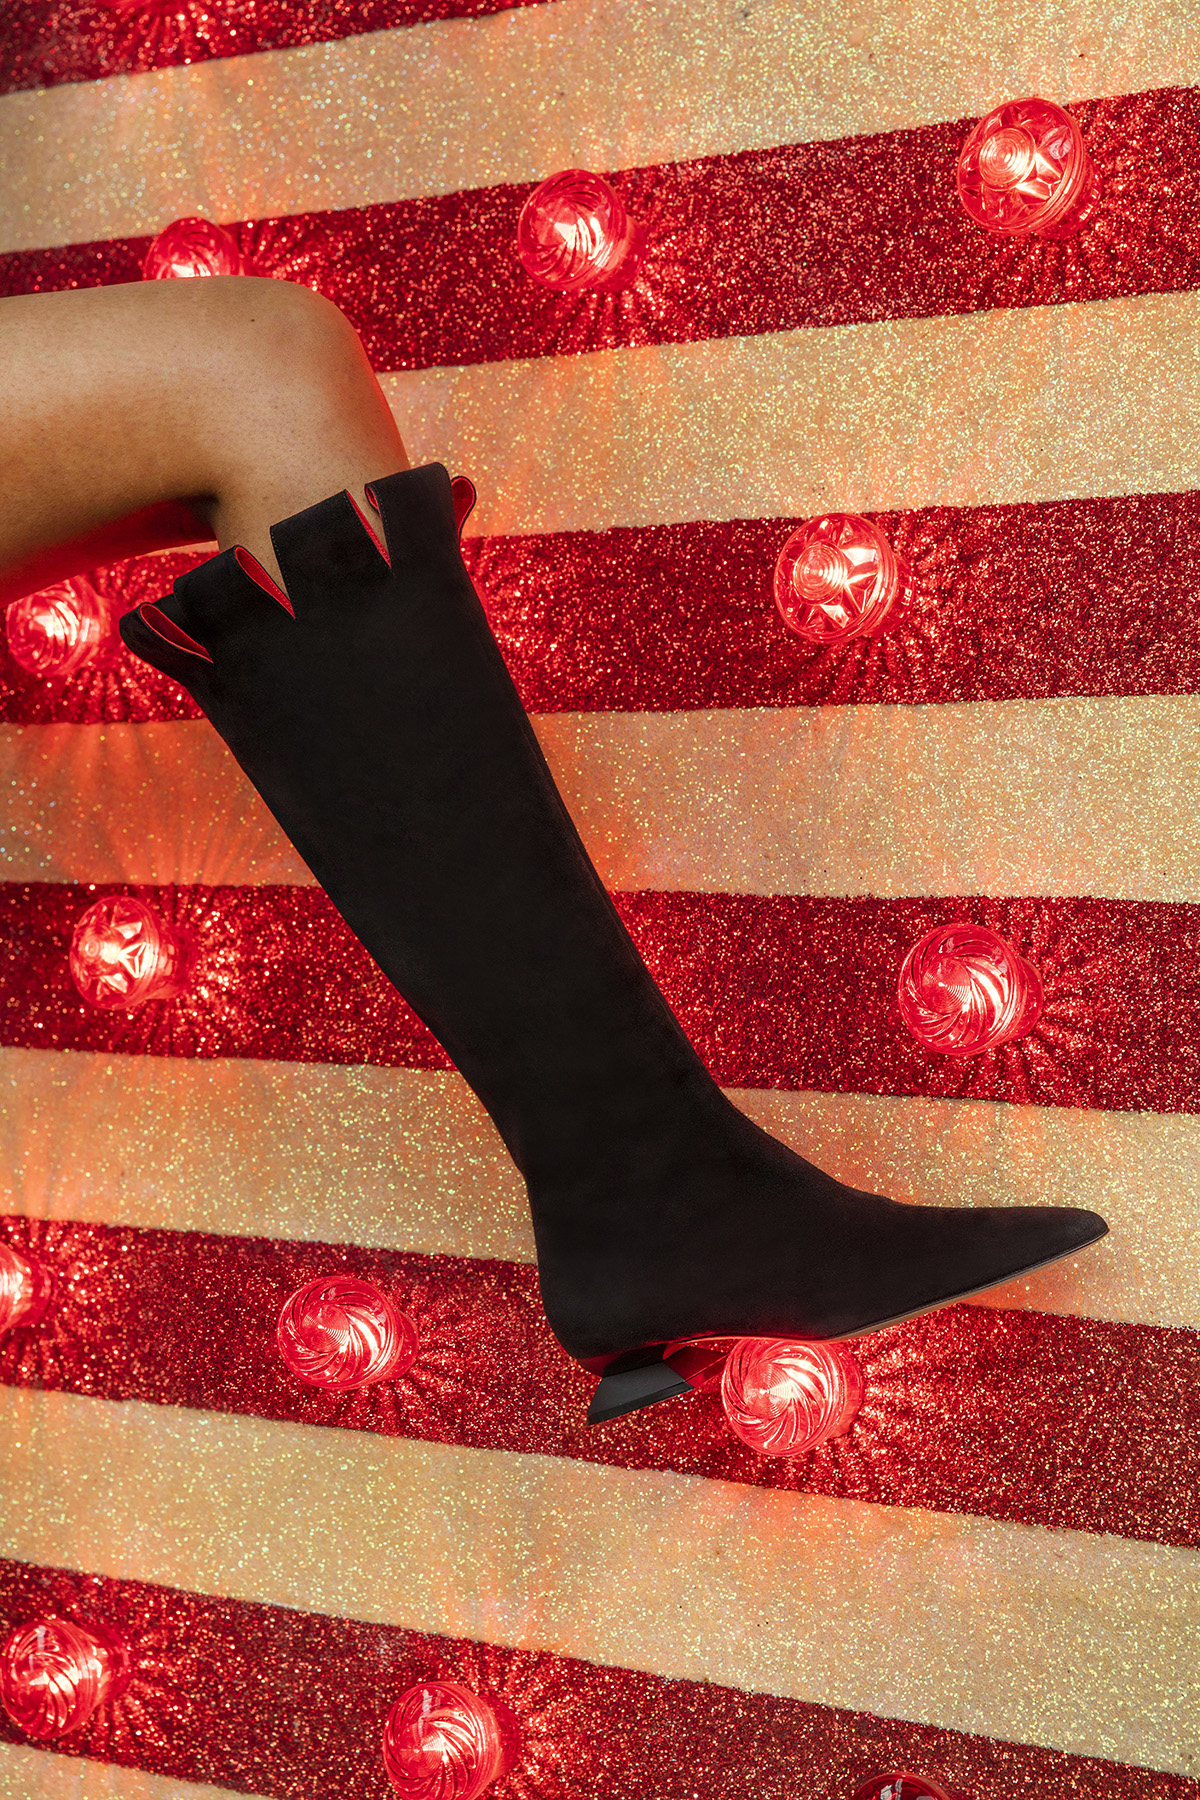 Leg in suede black boot against a background of white and red stripes and lights 